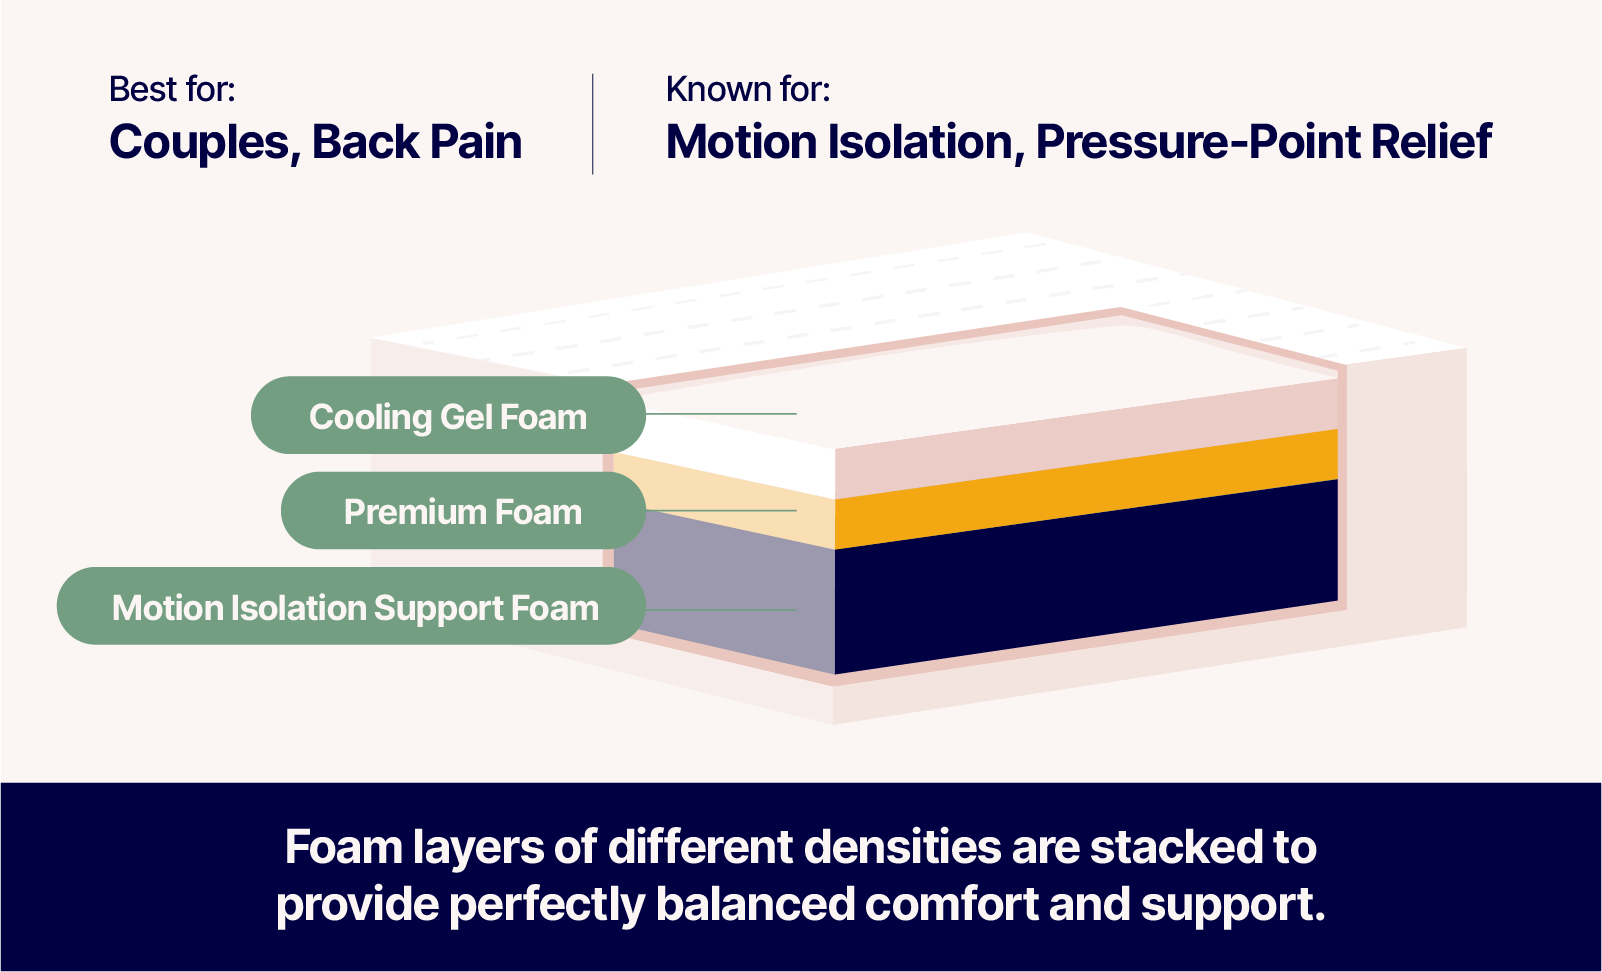 diagram of foam mattress showing cooling gel foam, premium foam, and motion isolation support foam layers. Text says the mattress is best for couples and back pain, and the mattress is known for motion isolation and pressure point relief. Description states that foam layers of different densities are stacked to provide perfectly balanced comfort and support.